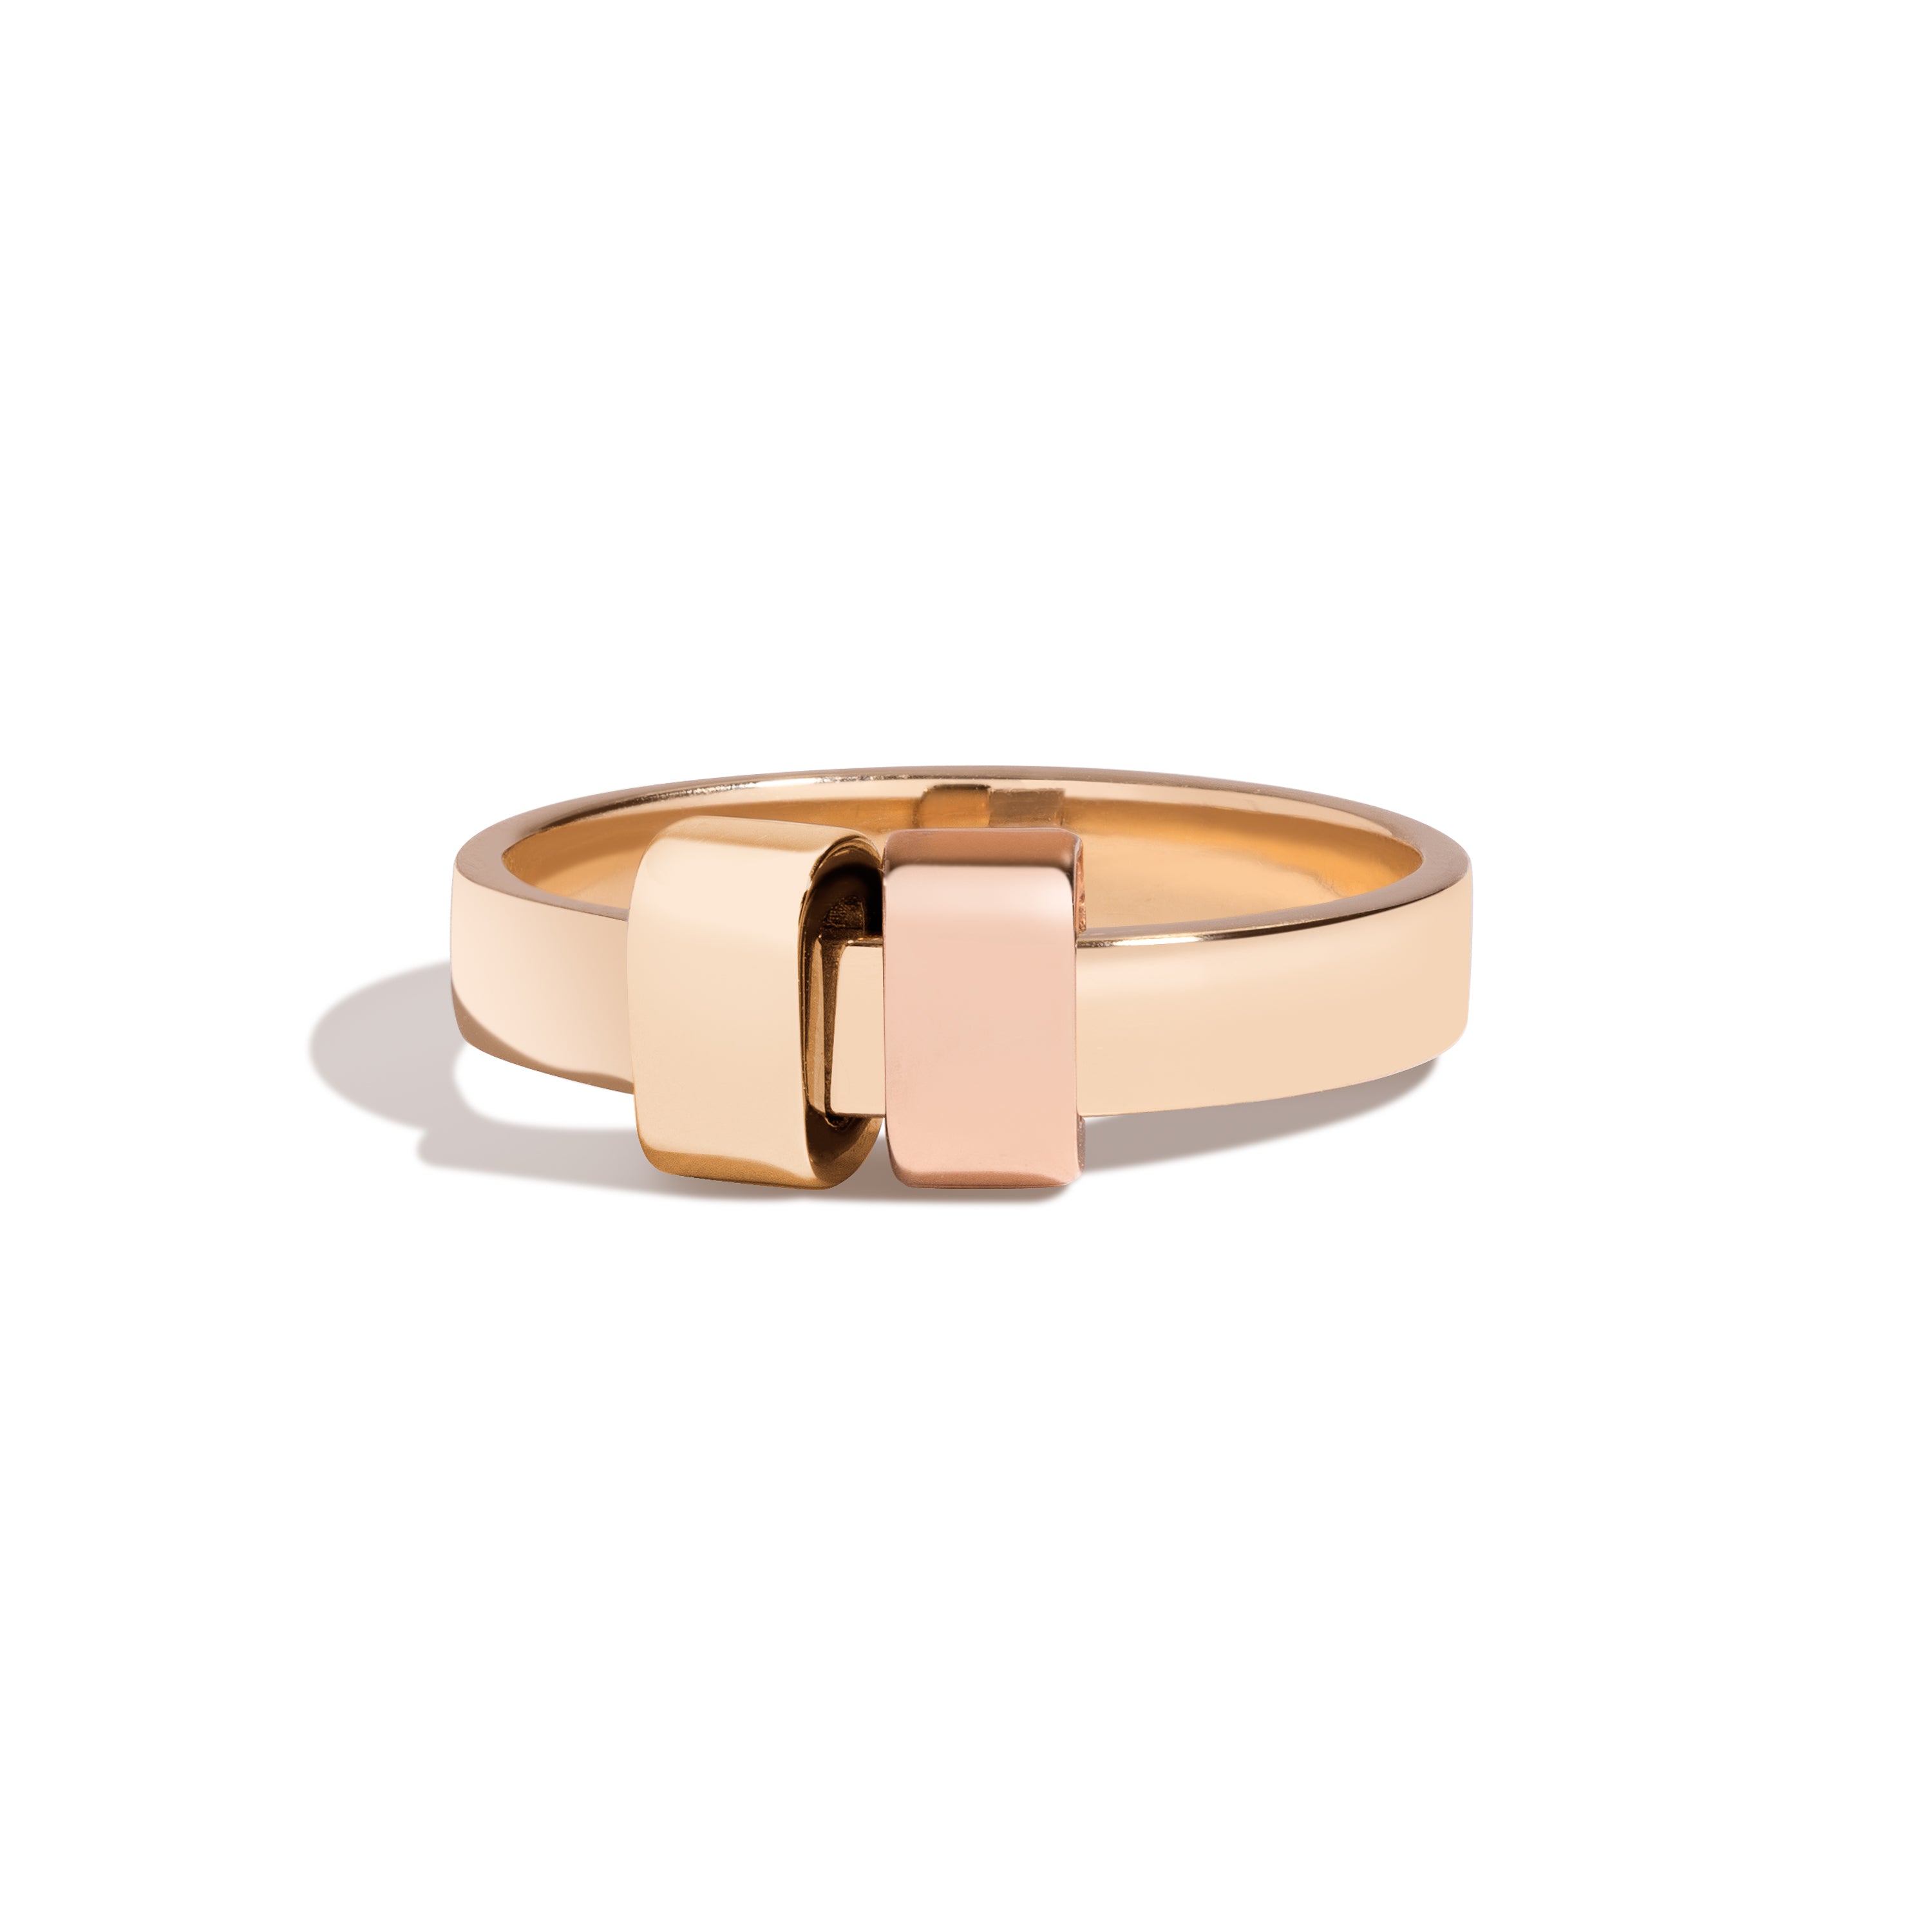 Shahla Karimi Joon Signature 4mm 14K Yellow Gold Band With 2 14K Yellow Gold and 14K Rose Gold  Wraps